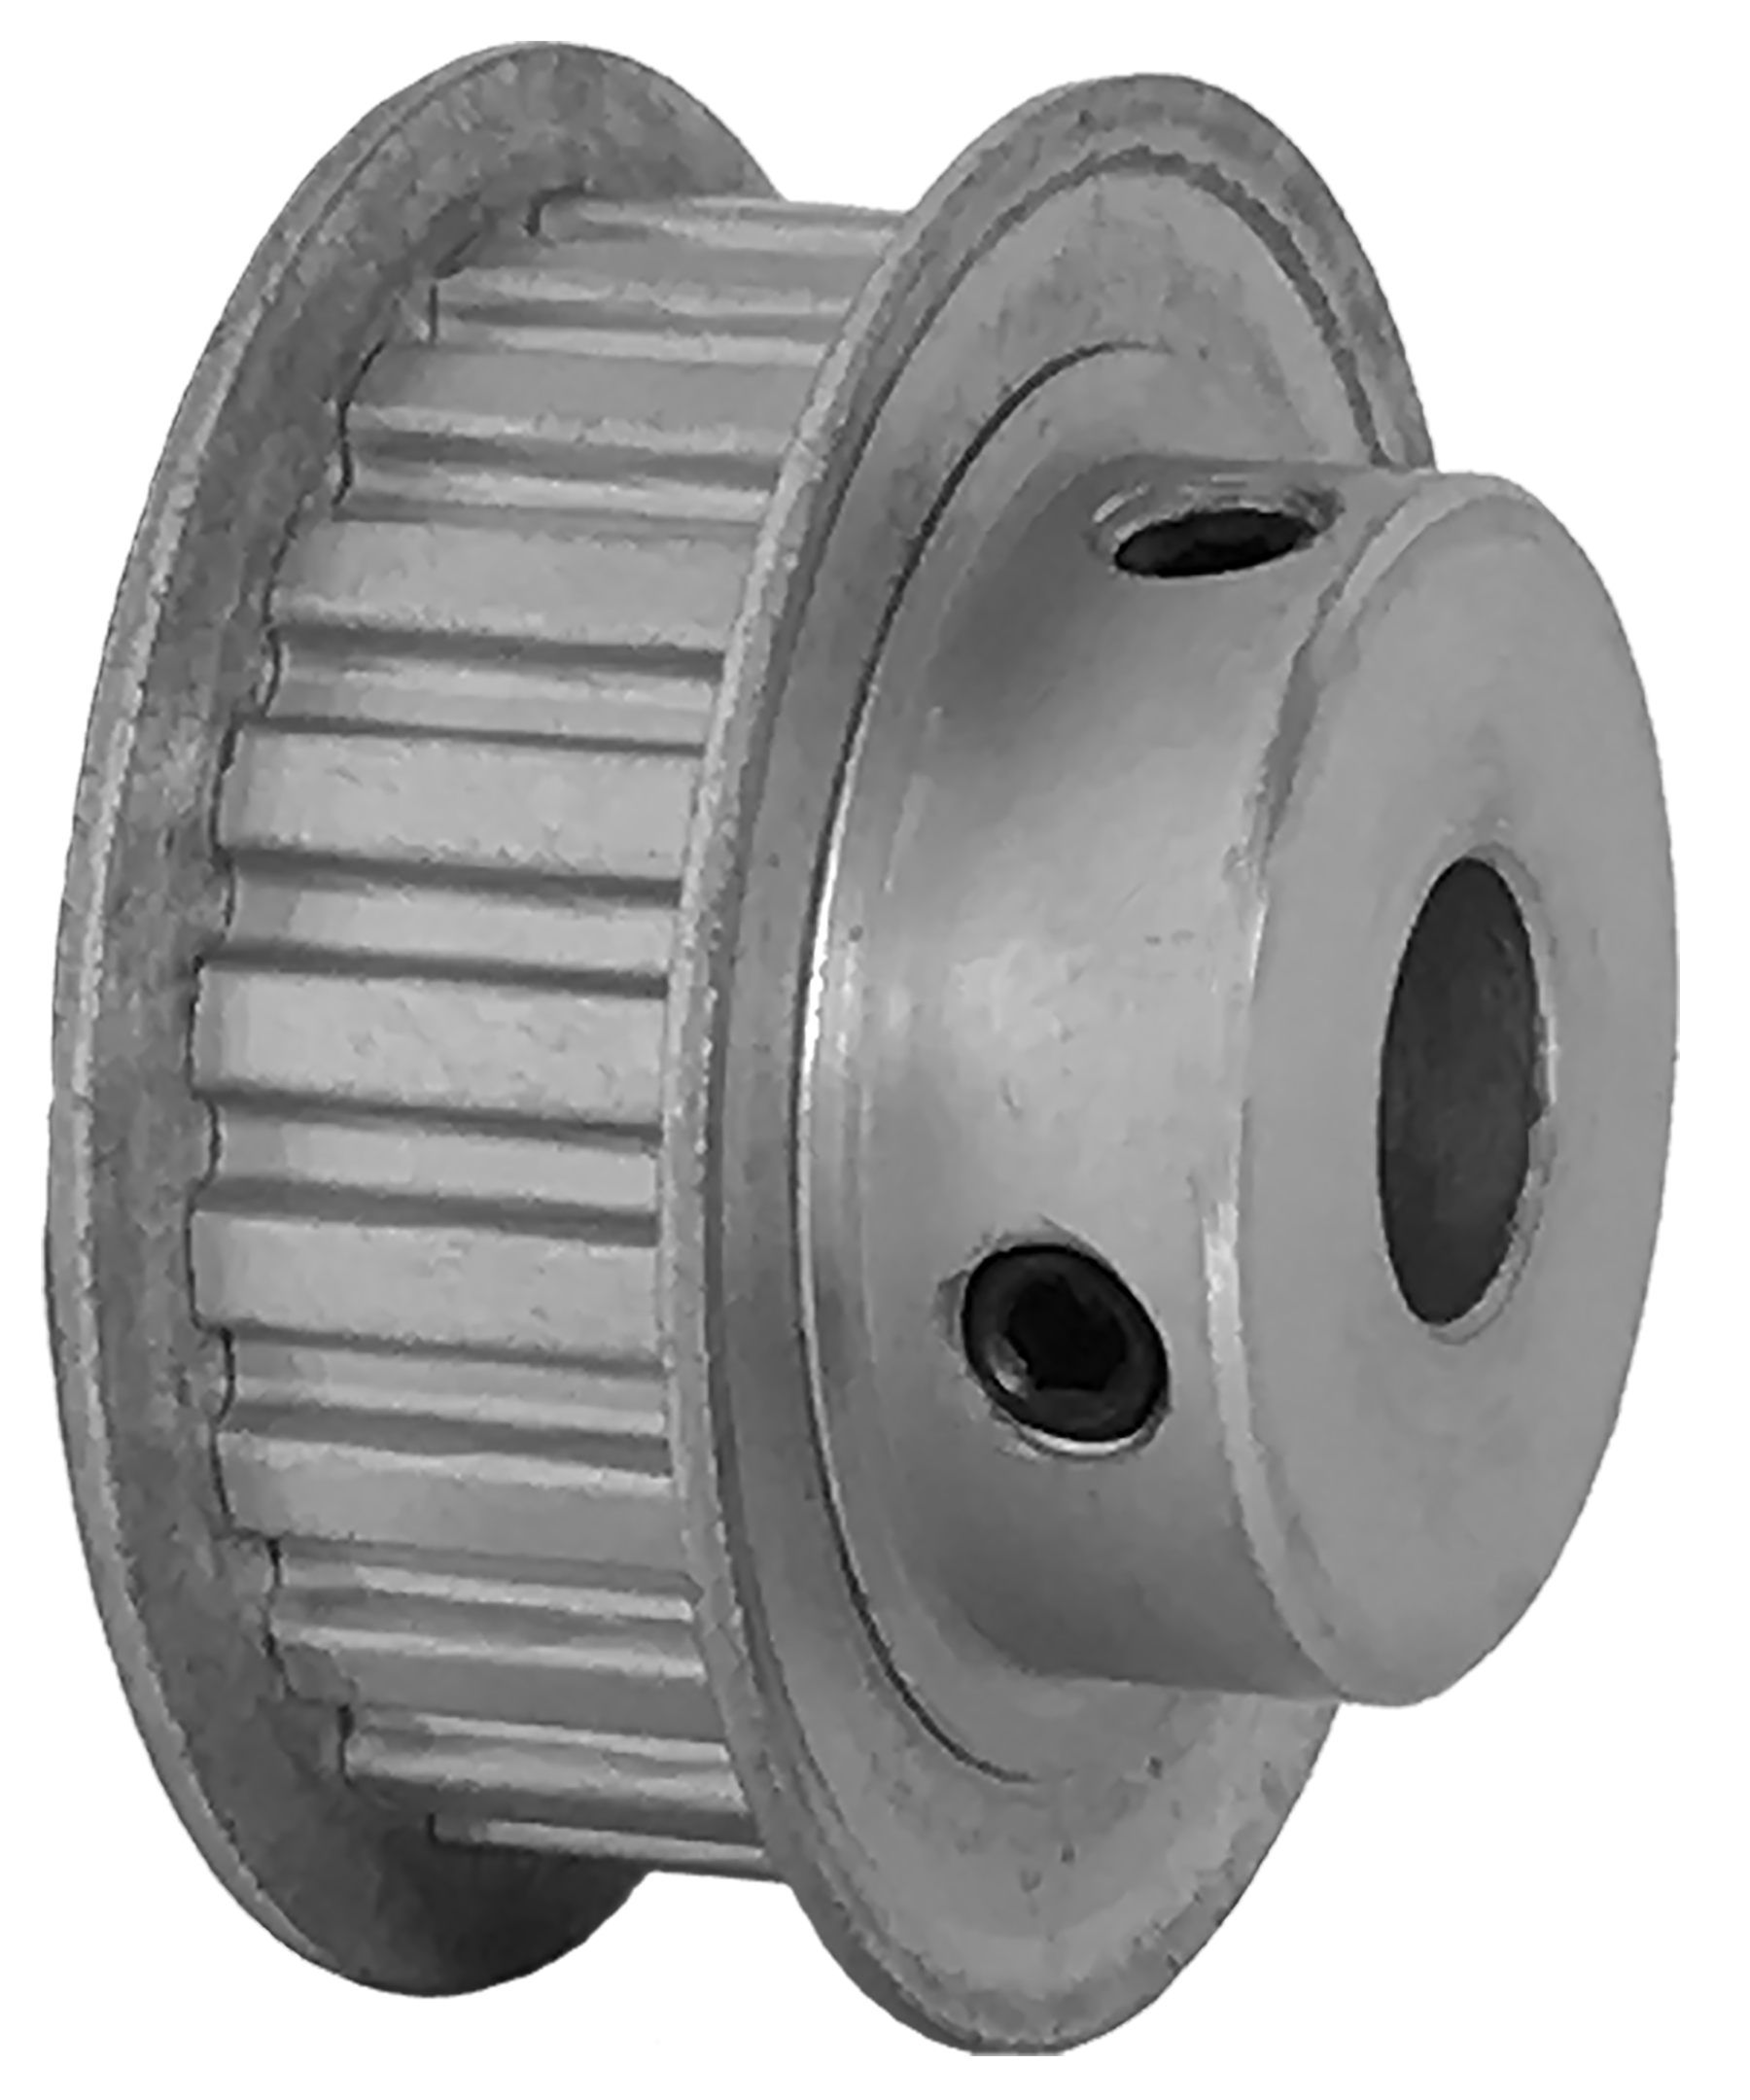 22XL037-6FA5 - Aluminum Imperial Pitch Pulleys